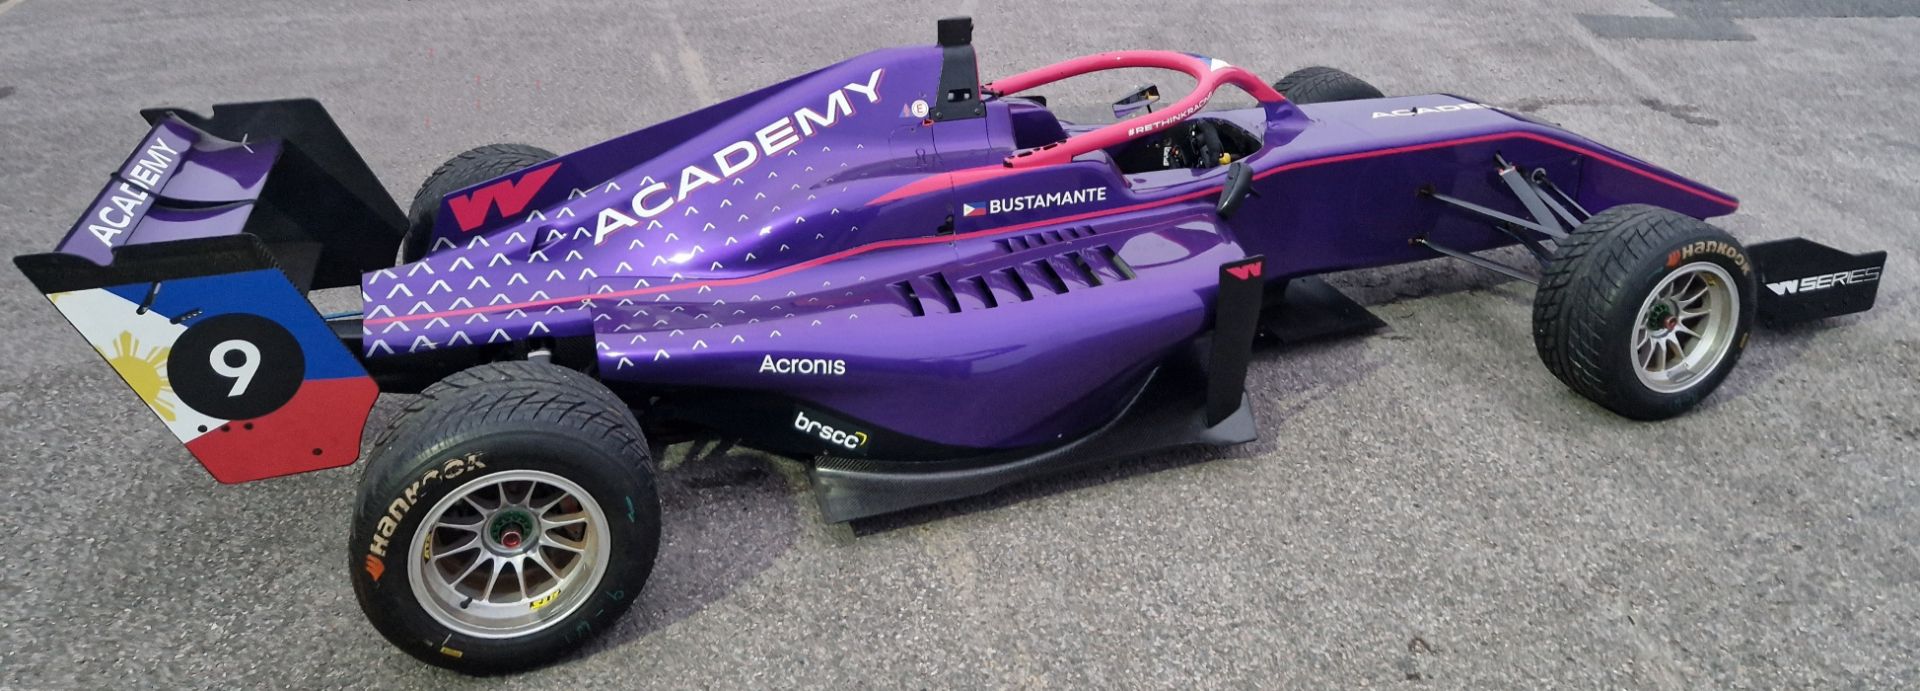 One TATUUS F3 T-318 Alfa Romeo Race Car Chassis No. 057 (2019) Finished in the W Series Academy - Image 2 of 7